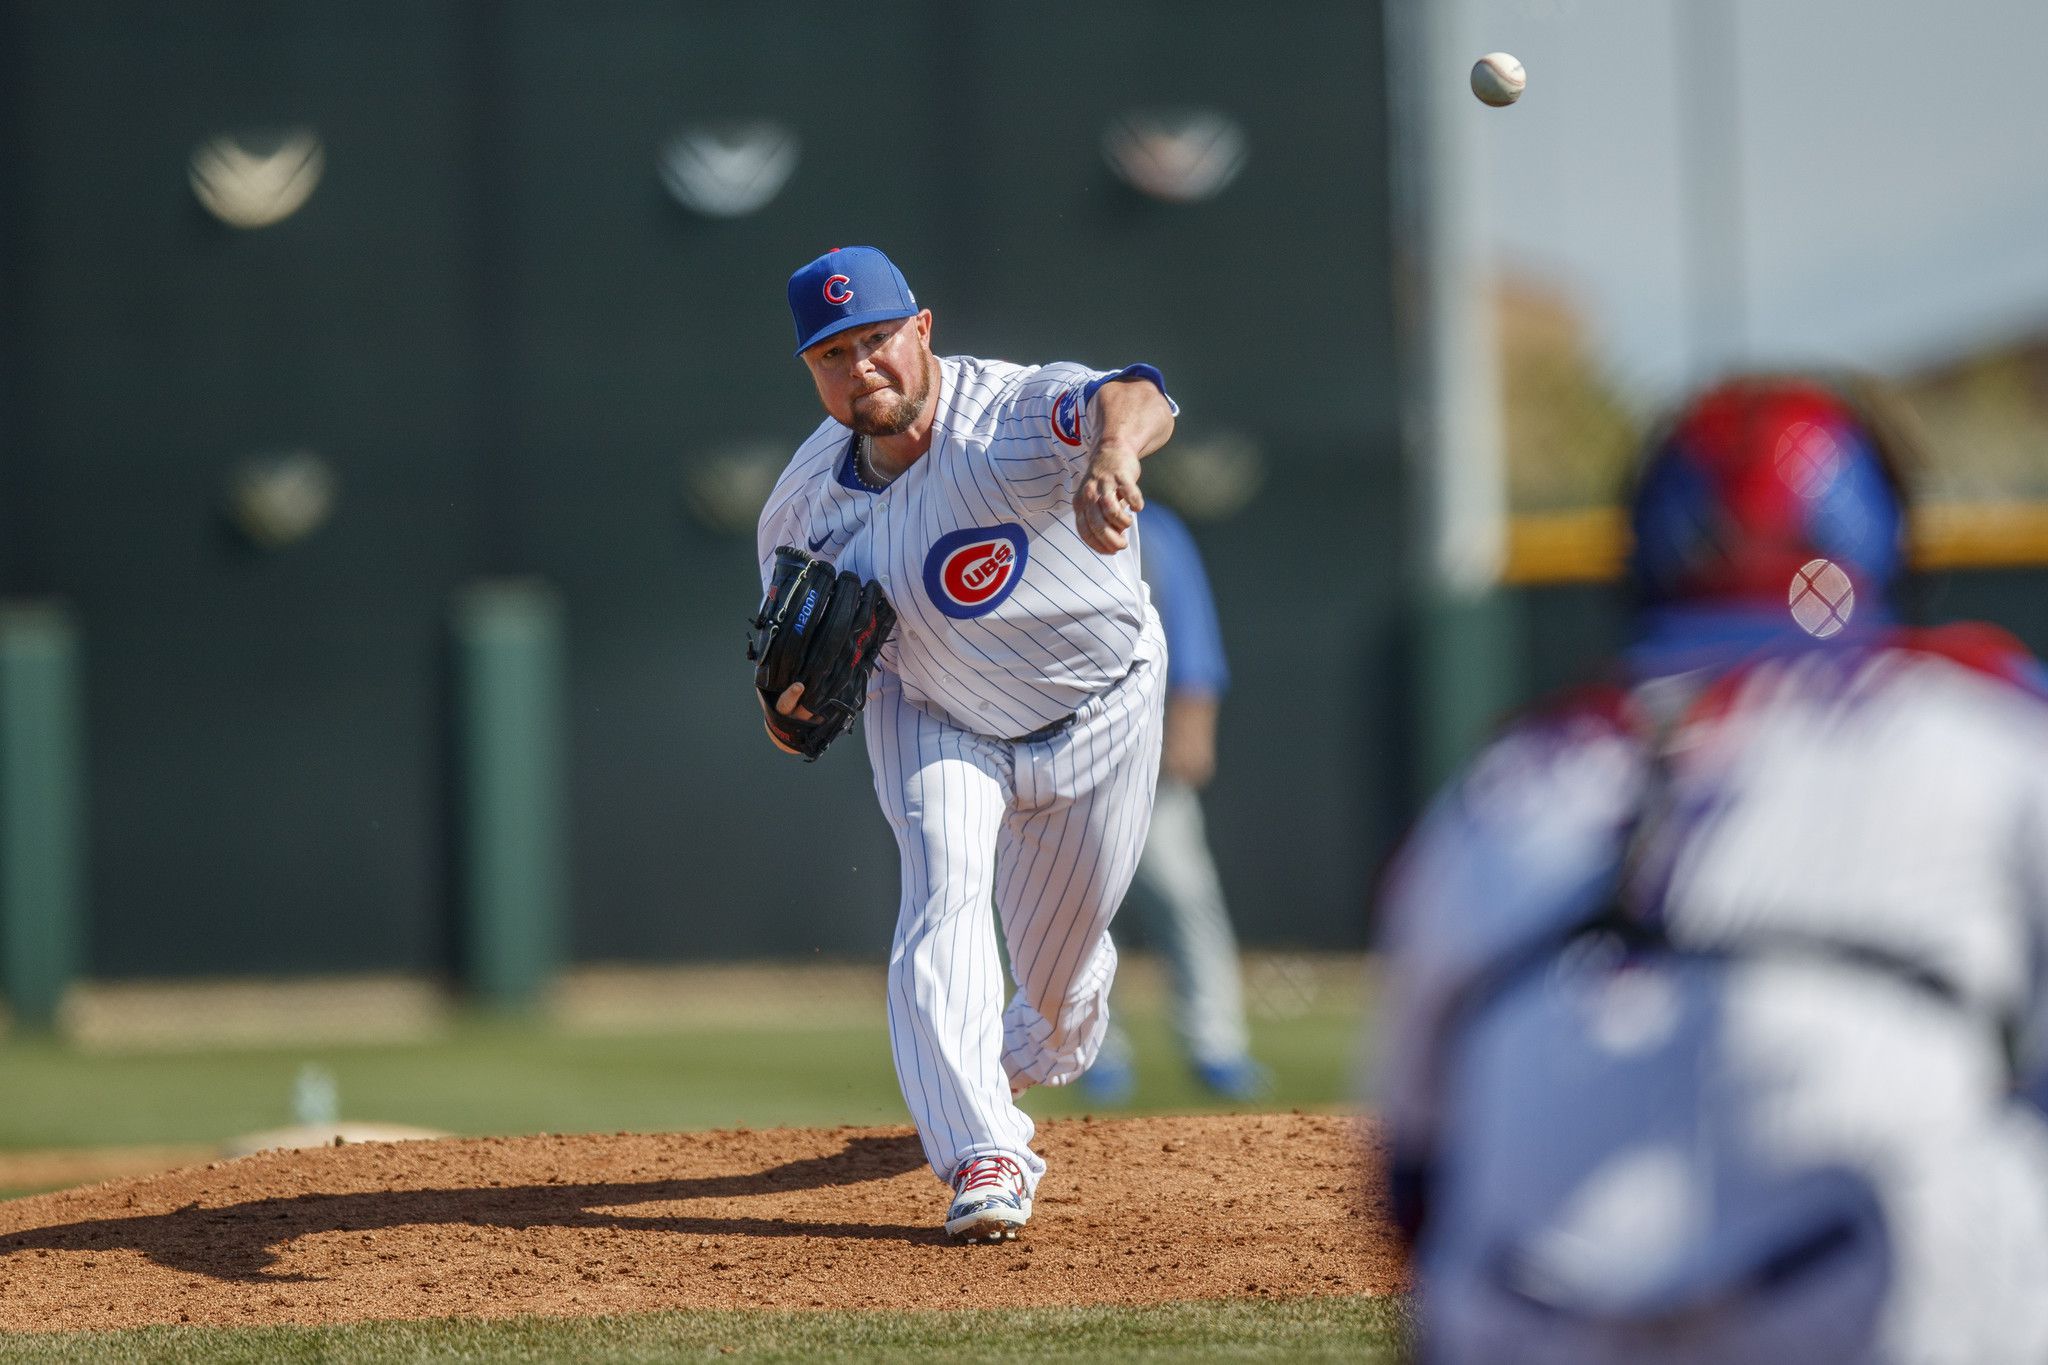 Jon Lester Wins On Heart—And So Will The Cubs In 2020